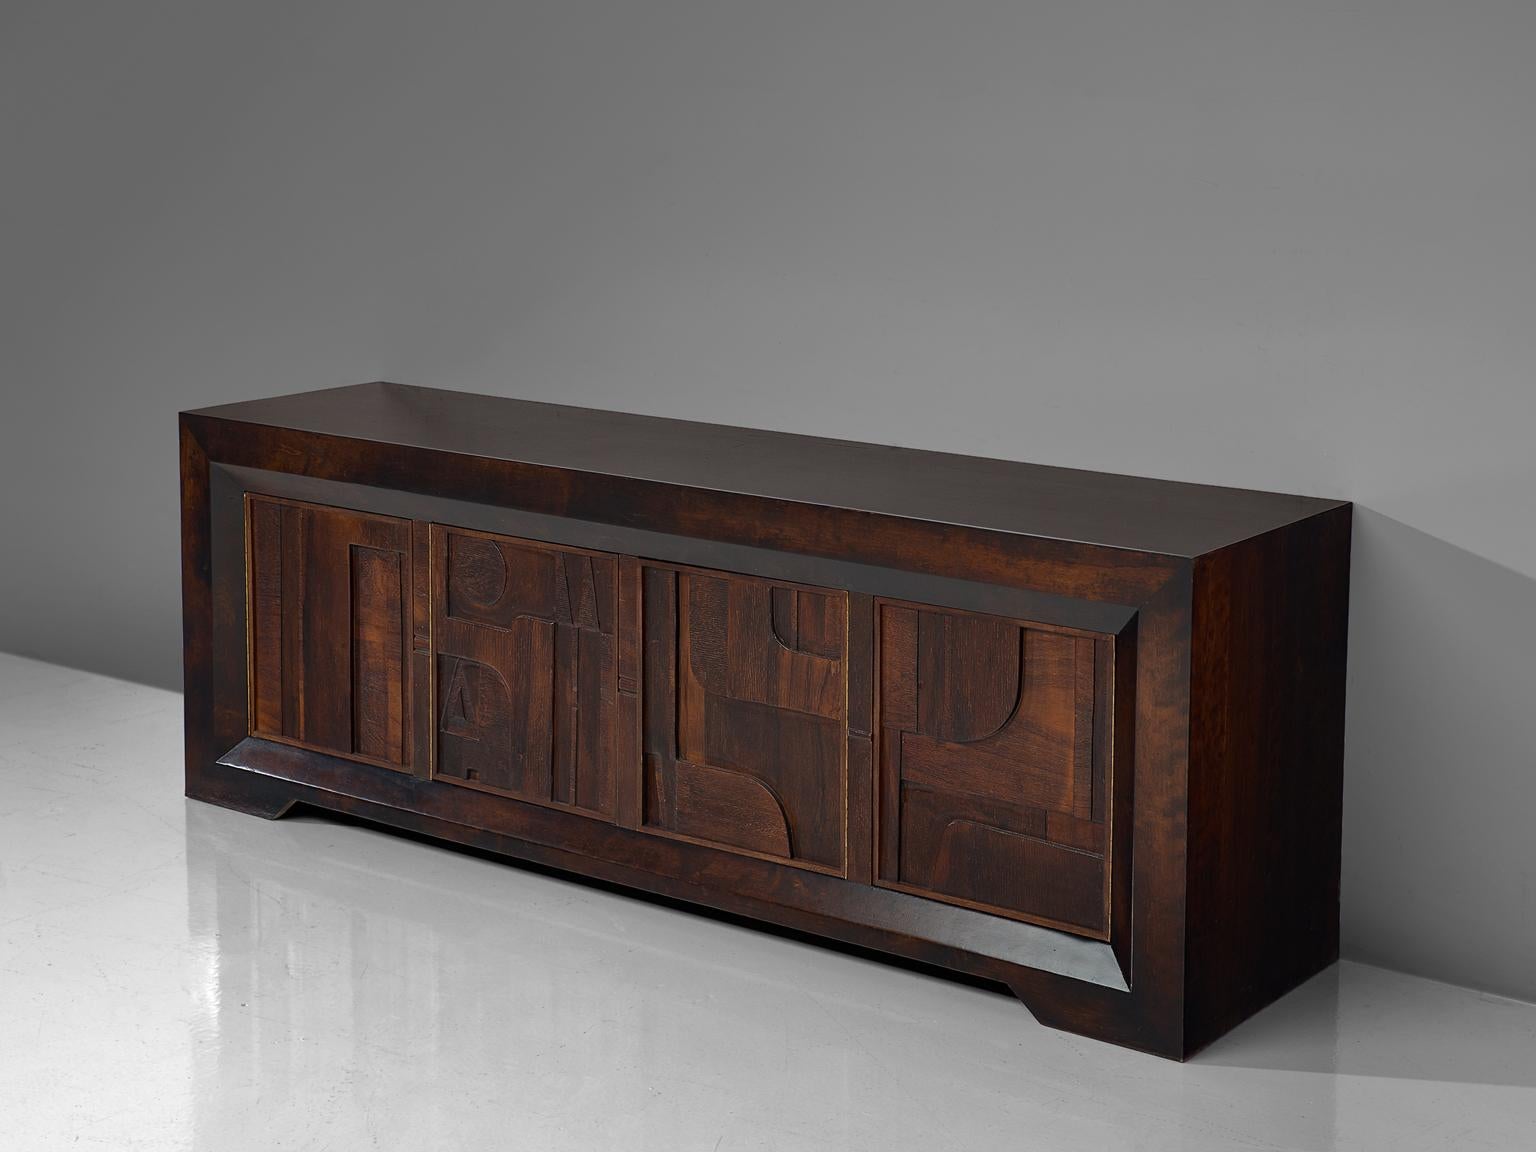 Nerone and Patuzzi for Gruppo NP2 Constructivism Wooden Sideboard 1